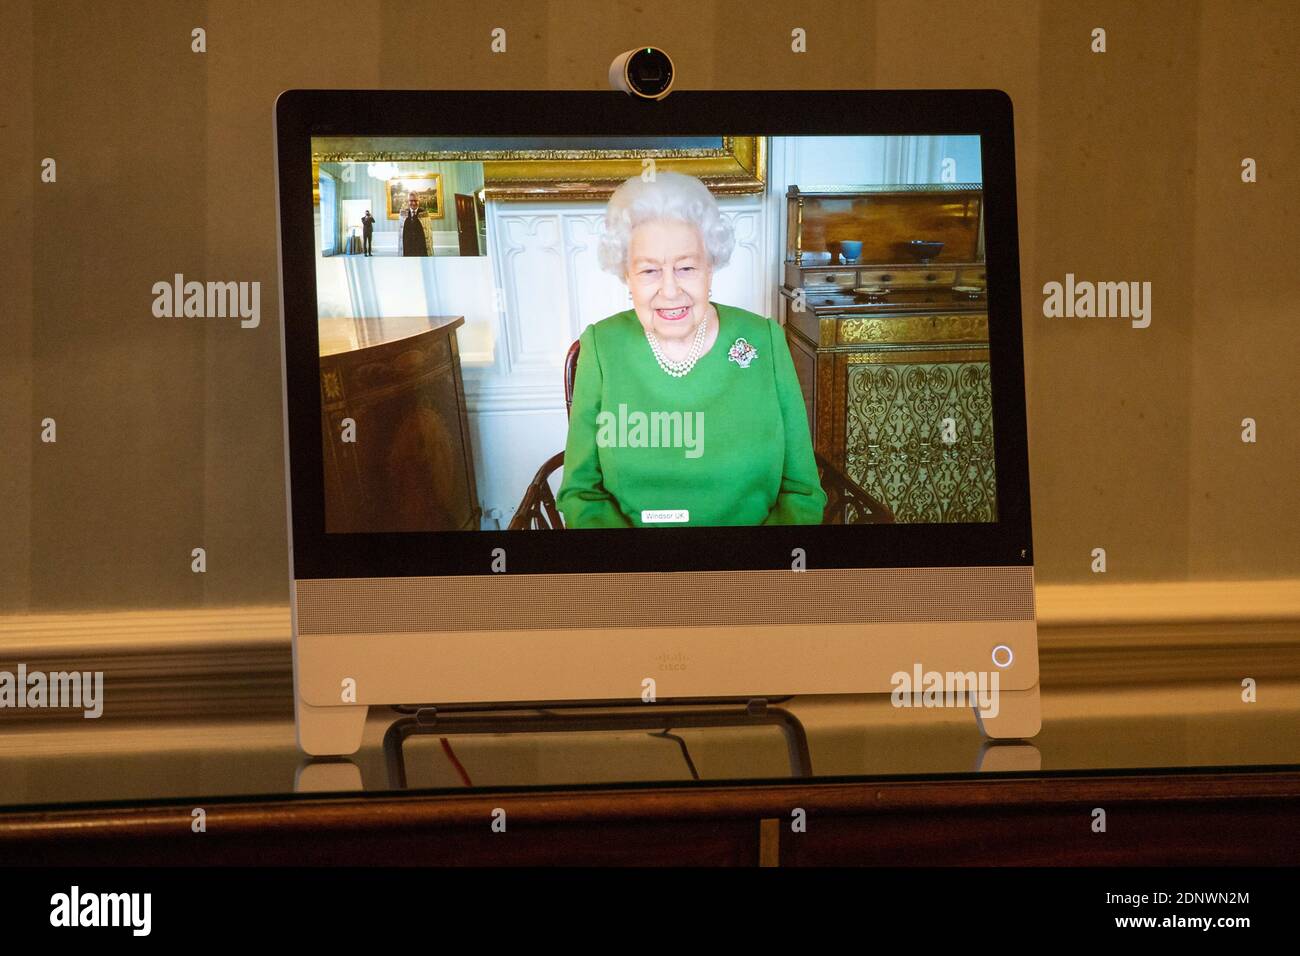 Britain's Queen Elizabeth appears on a screen by videolink from Windsor Castle, where she is in residence, during a virtual audience to receive Ambassador of Belgium Bruno van der Pluijm and Hildegarde Van de Voorde who attended at Buckingham Palace in London, Britain December 18, 2020. Dominic Lipinski/PA Wire/Pool via REUTERS Stock Photo